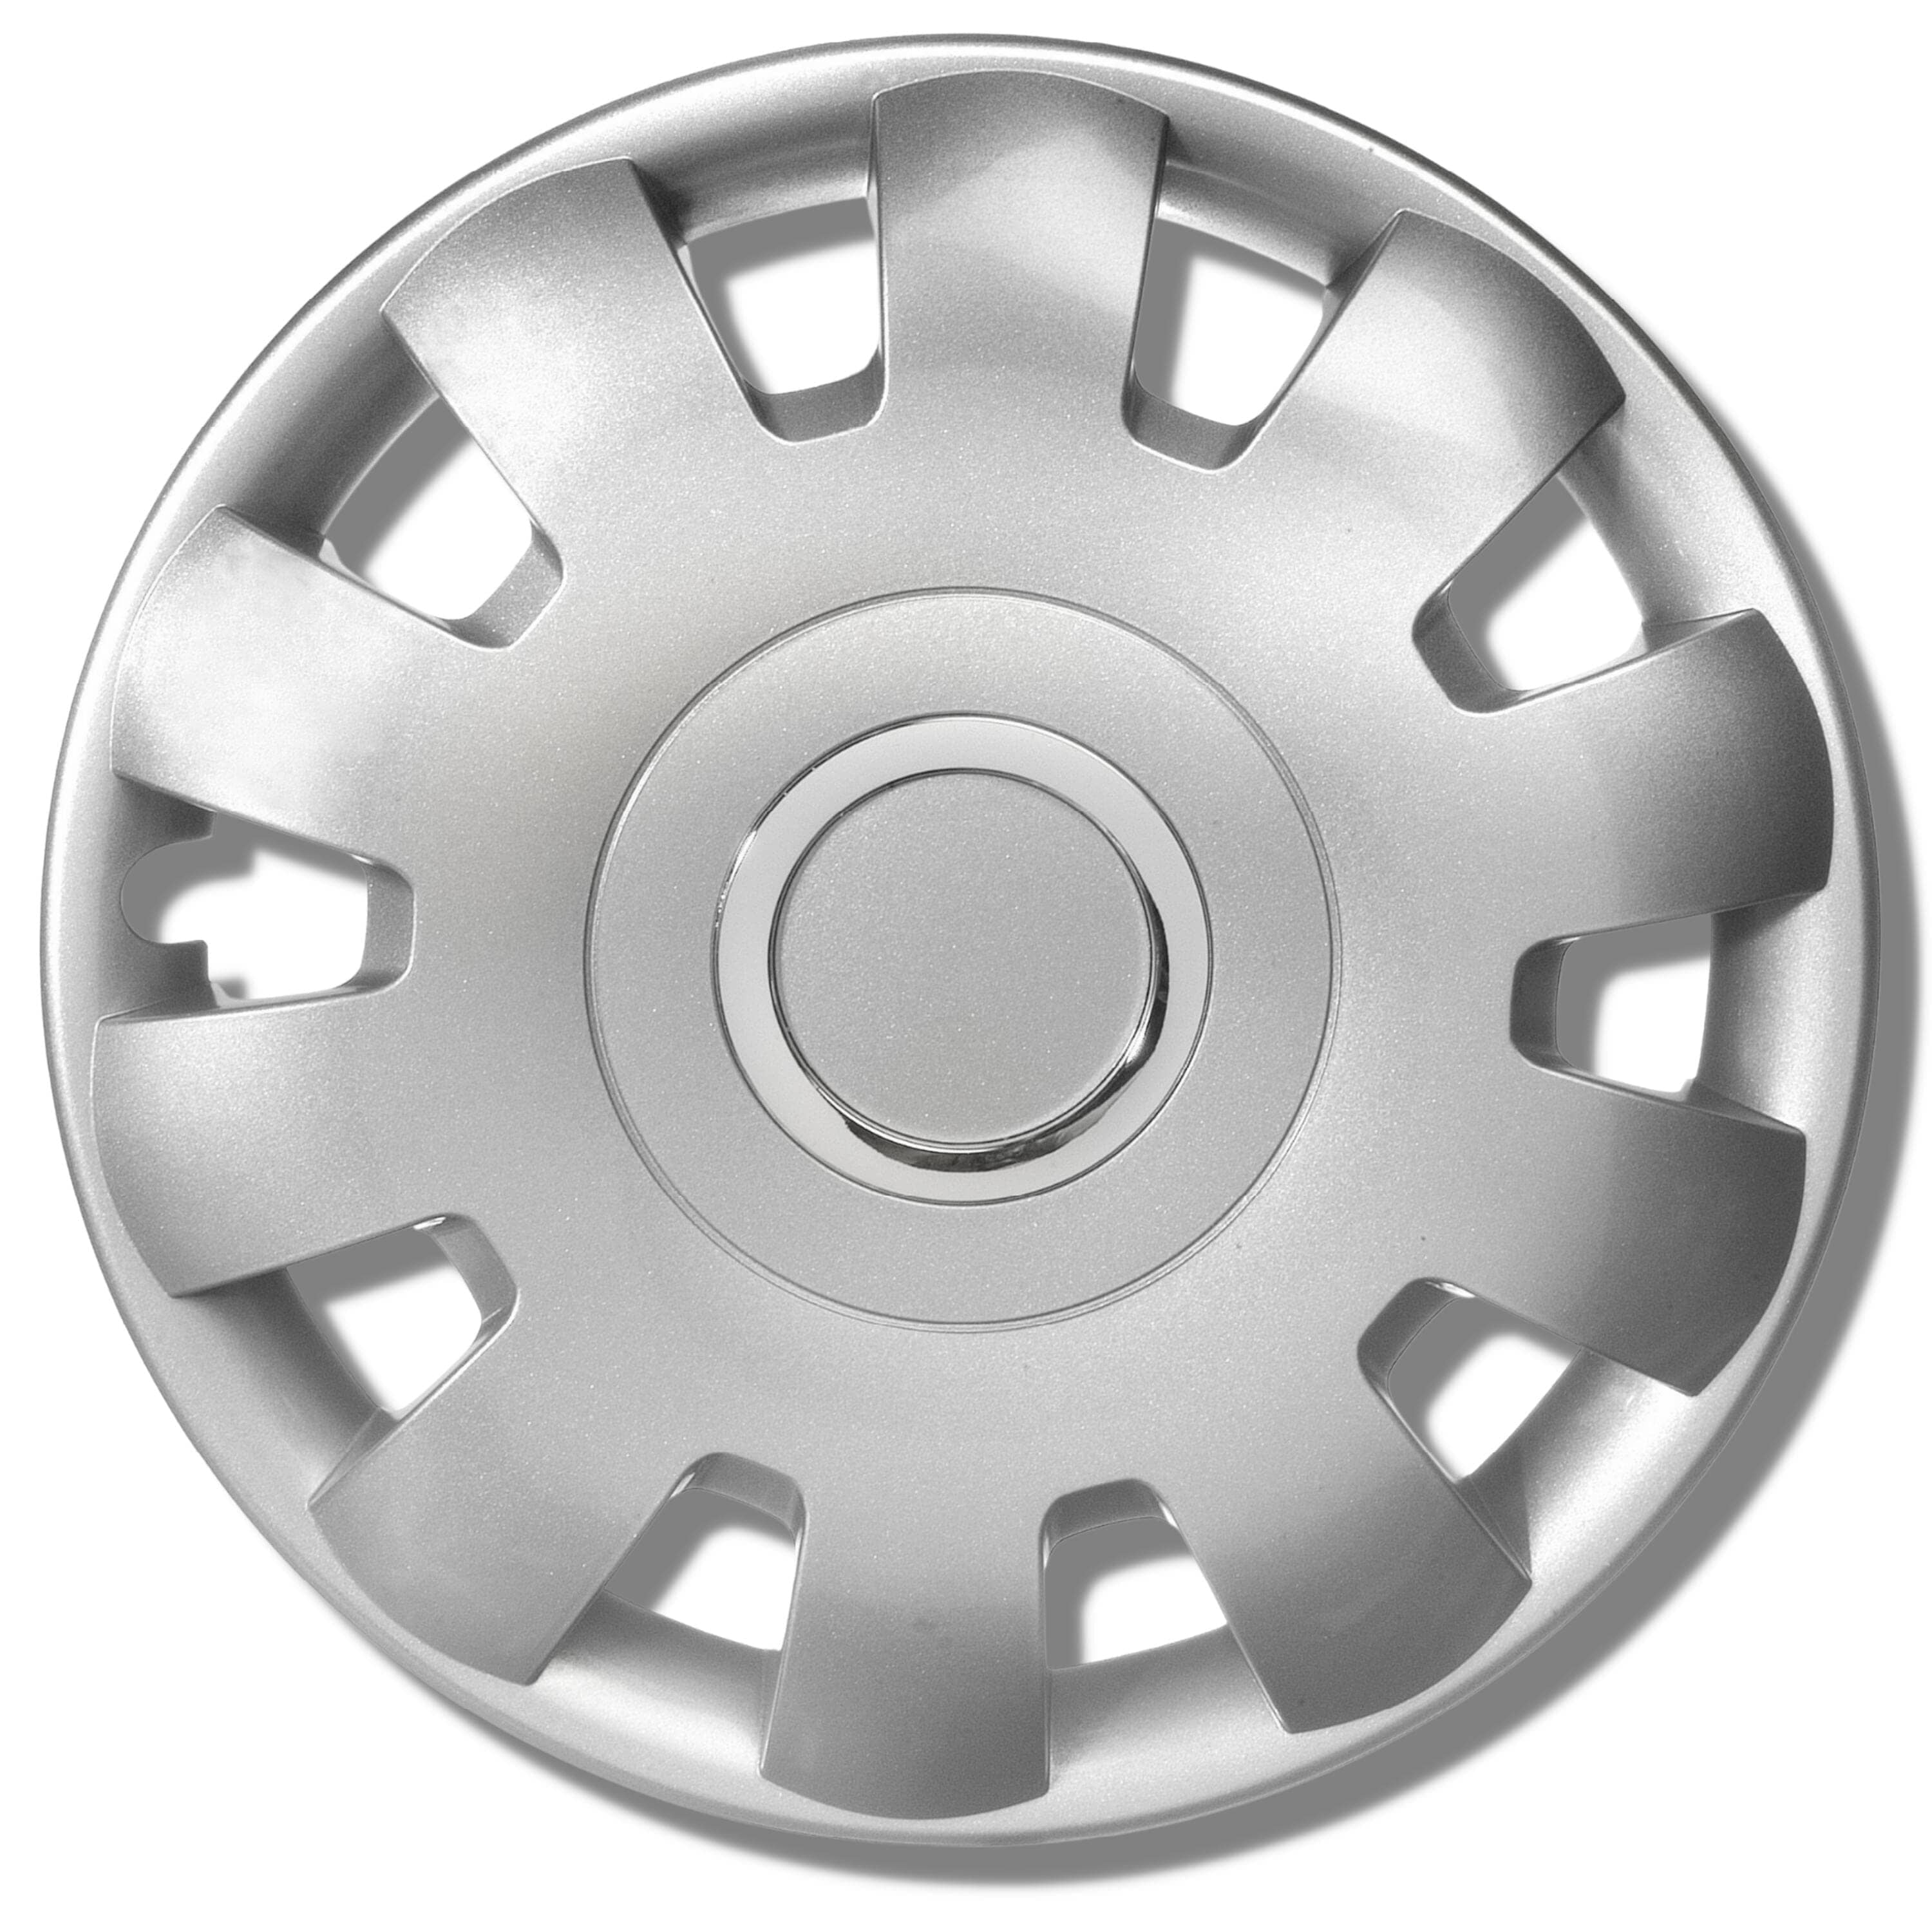 Kuglo hubcaps Malibu silver or black (4 pieces)